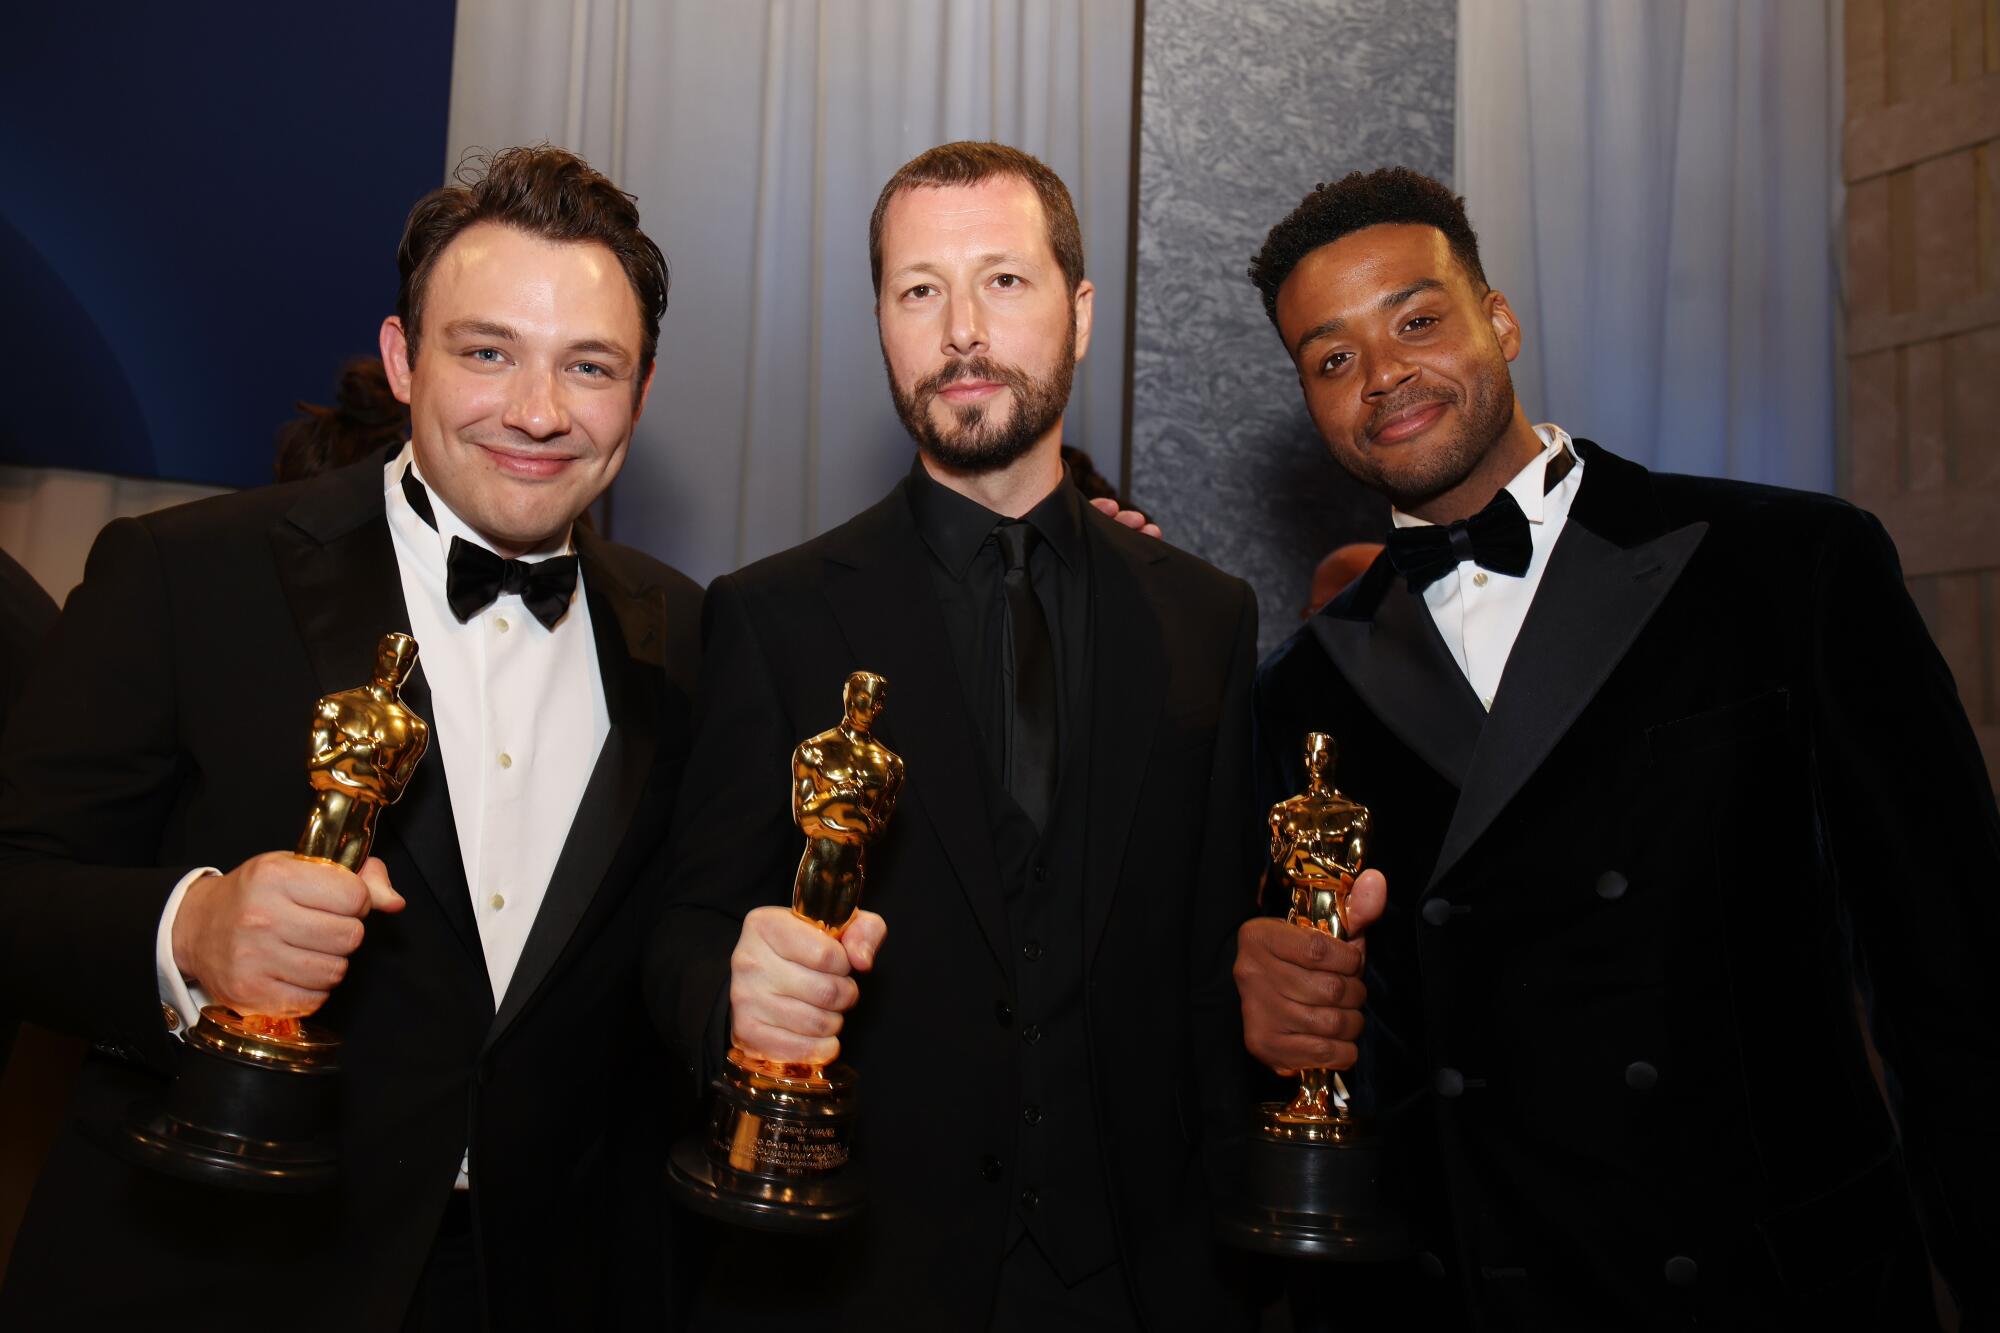 Three men with Oscars smile at the camera.